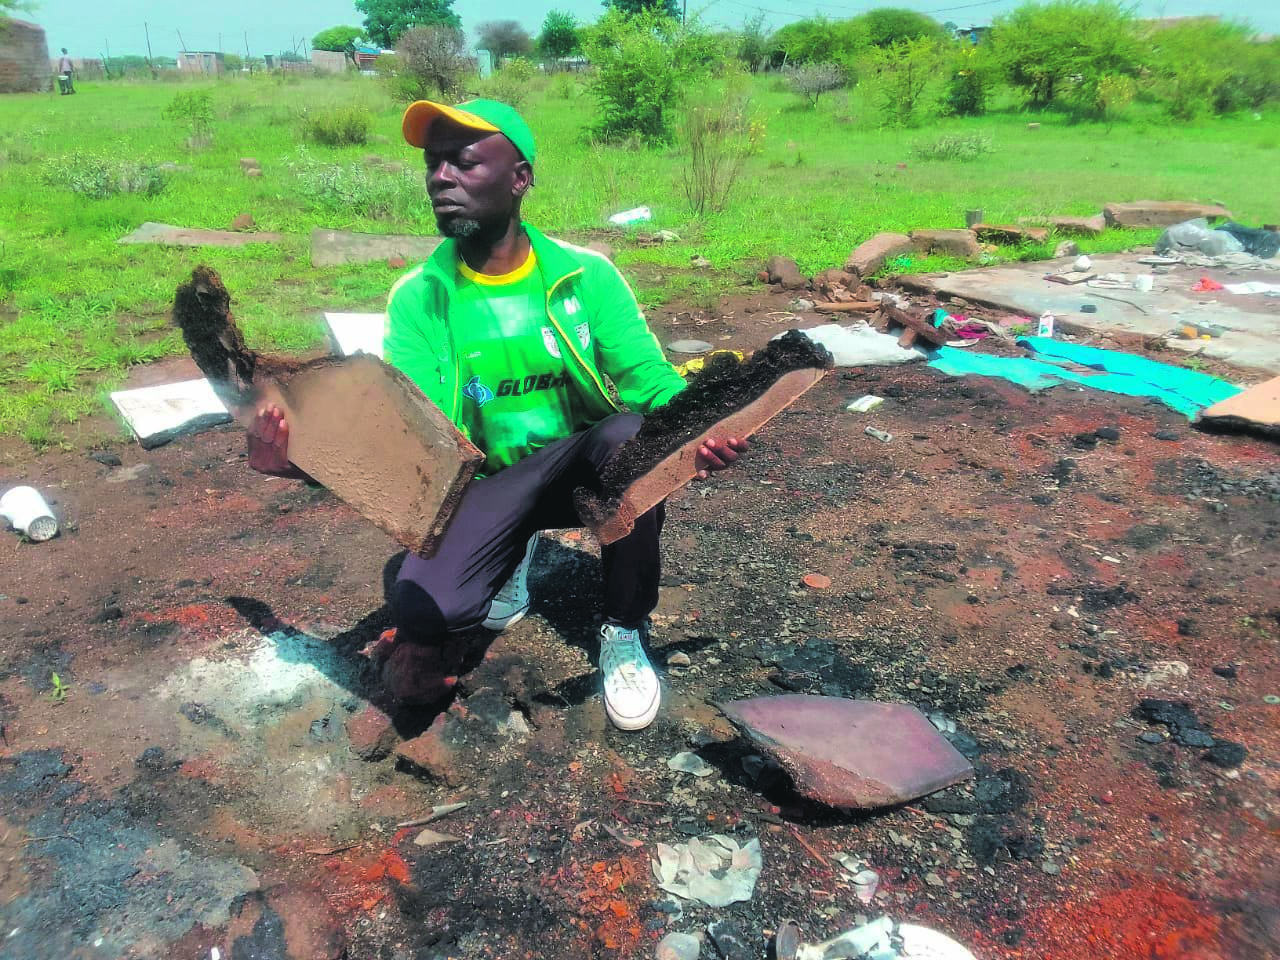 Community leader Shangy Mbekwa holding the remains of wooden coffins that were burnt by community members a month after they were discovered abandoned in a shack. Photo by Raymond Morare